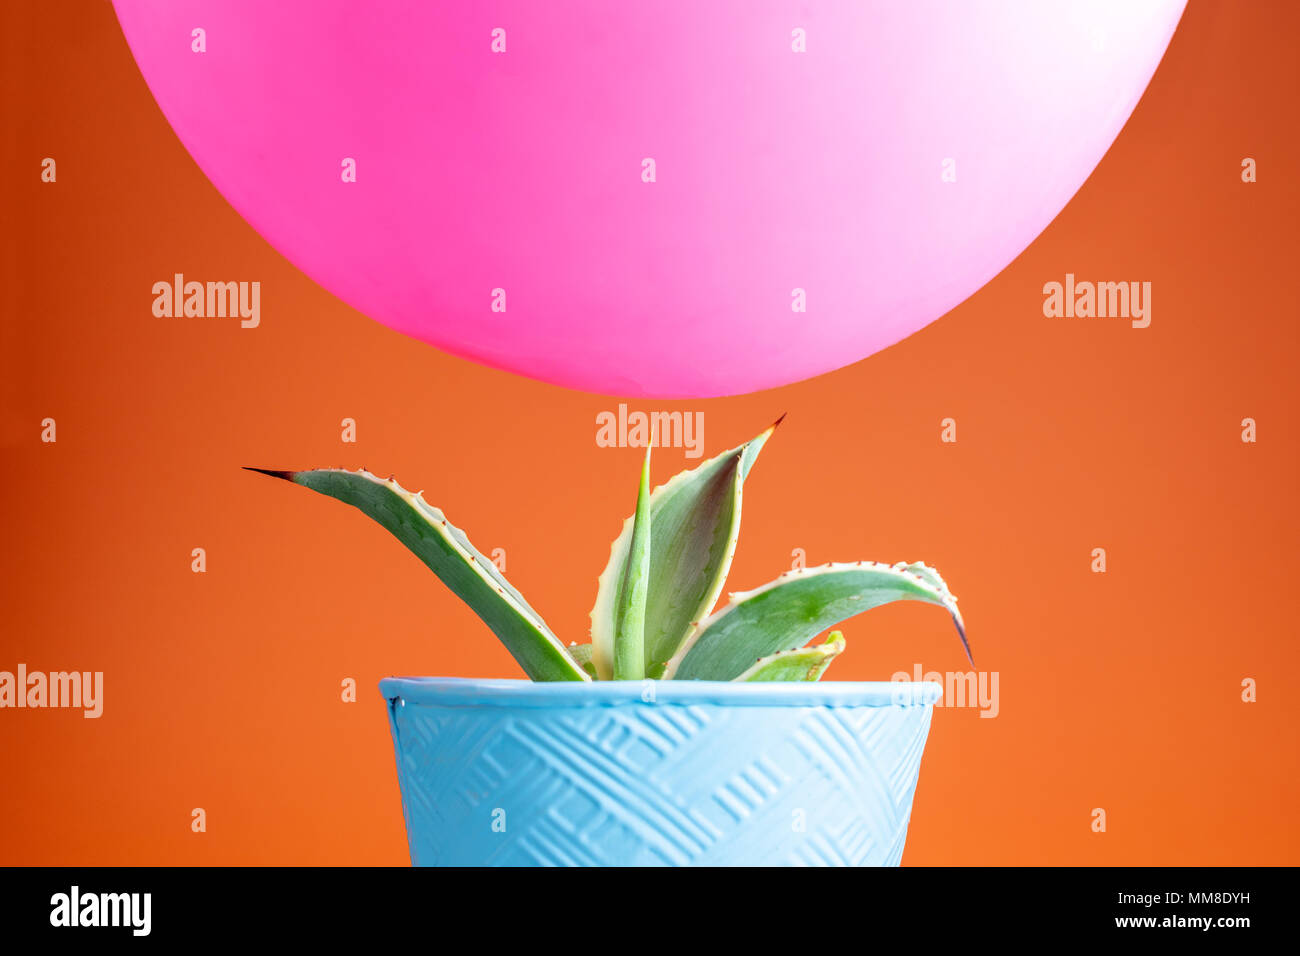 Pink balloon balancing precariously above a sharp point cactus with a bright orange background Stock Photo